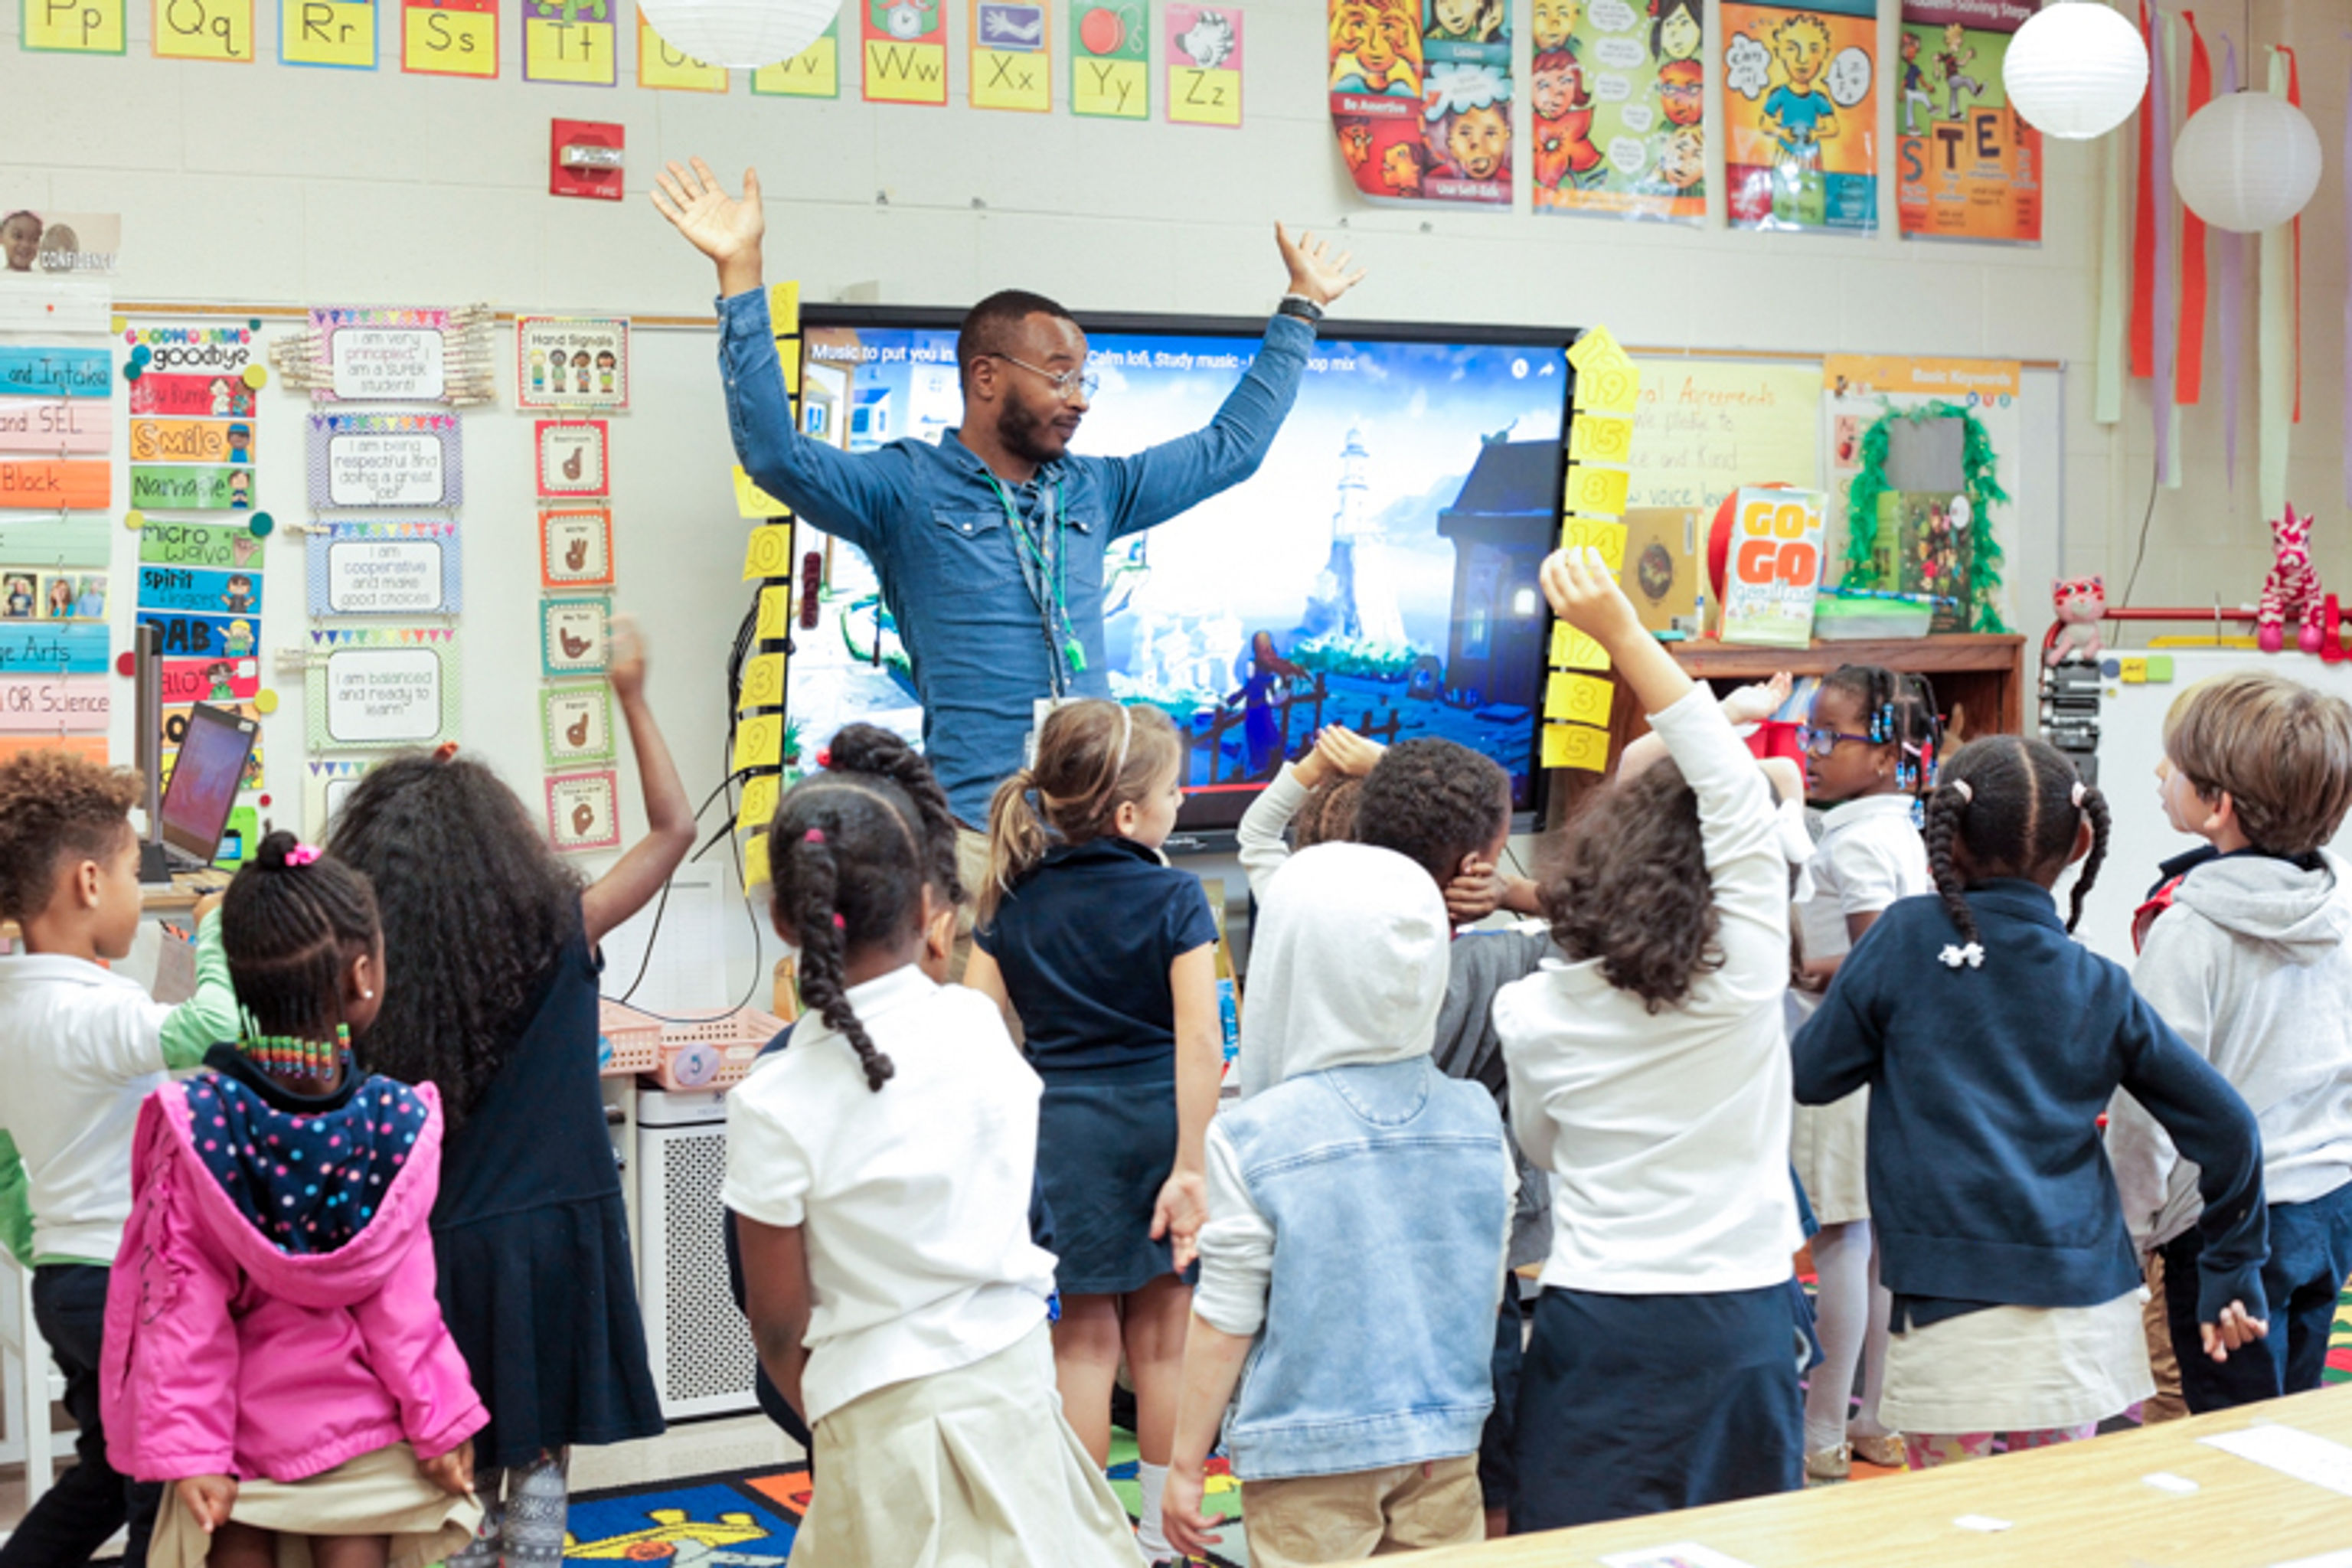 Excited teacher with raised hands in front of a group kindergarteners